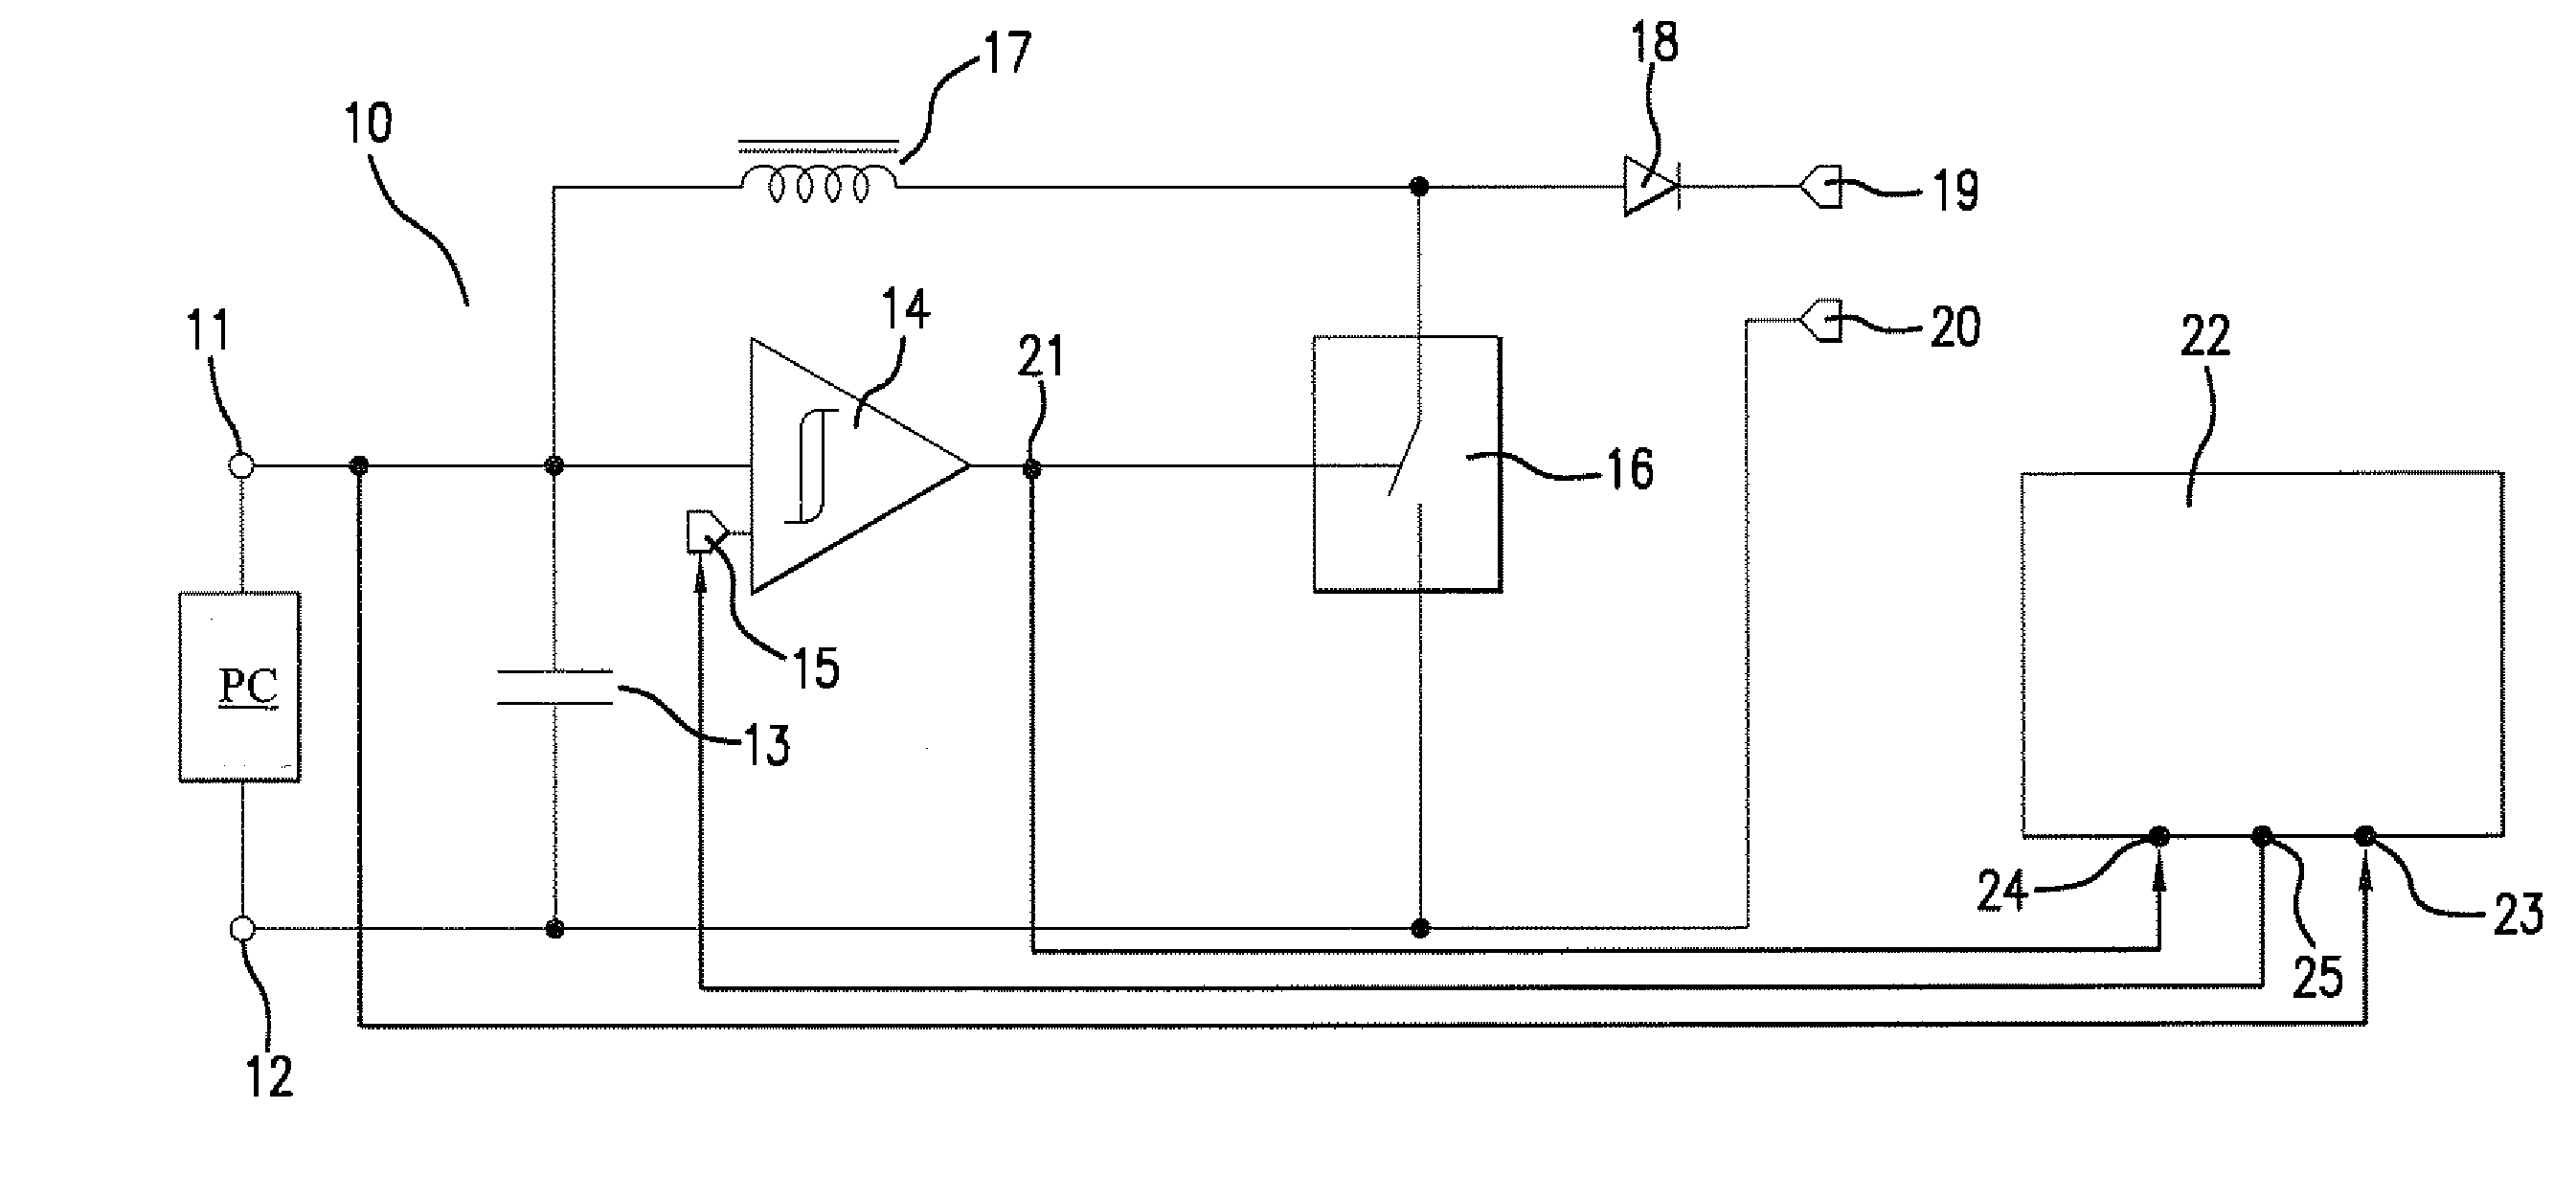 Method for maximum power point tracking of photovoltaic cells by power converters and power combiners